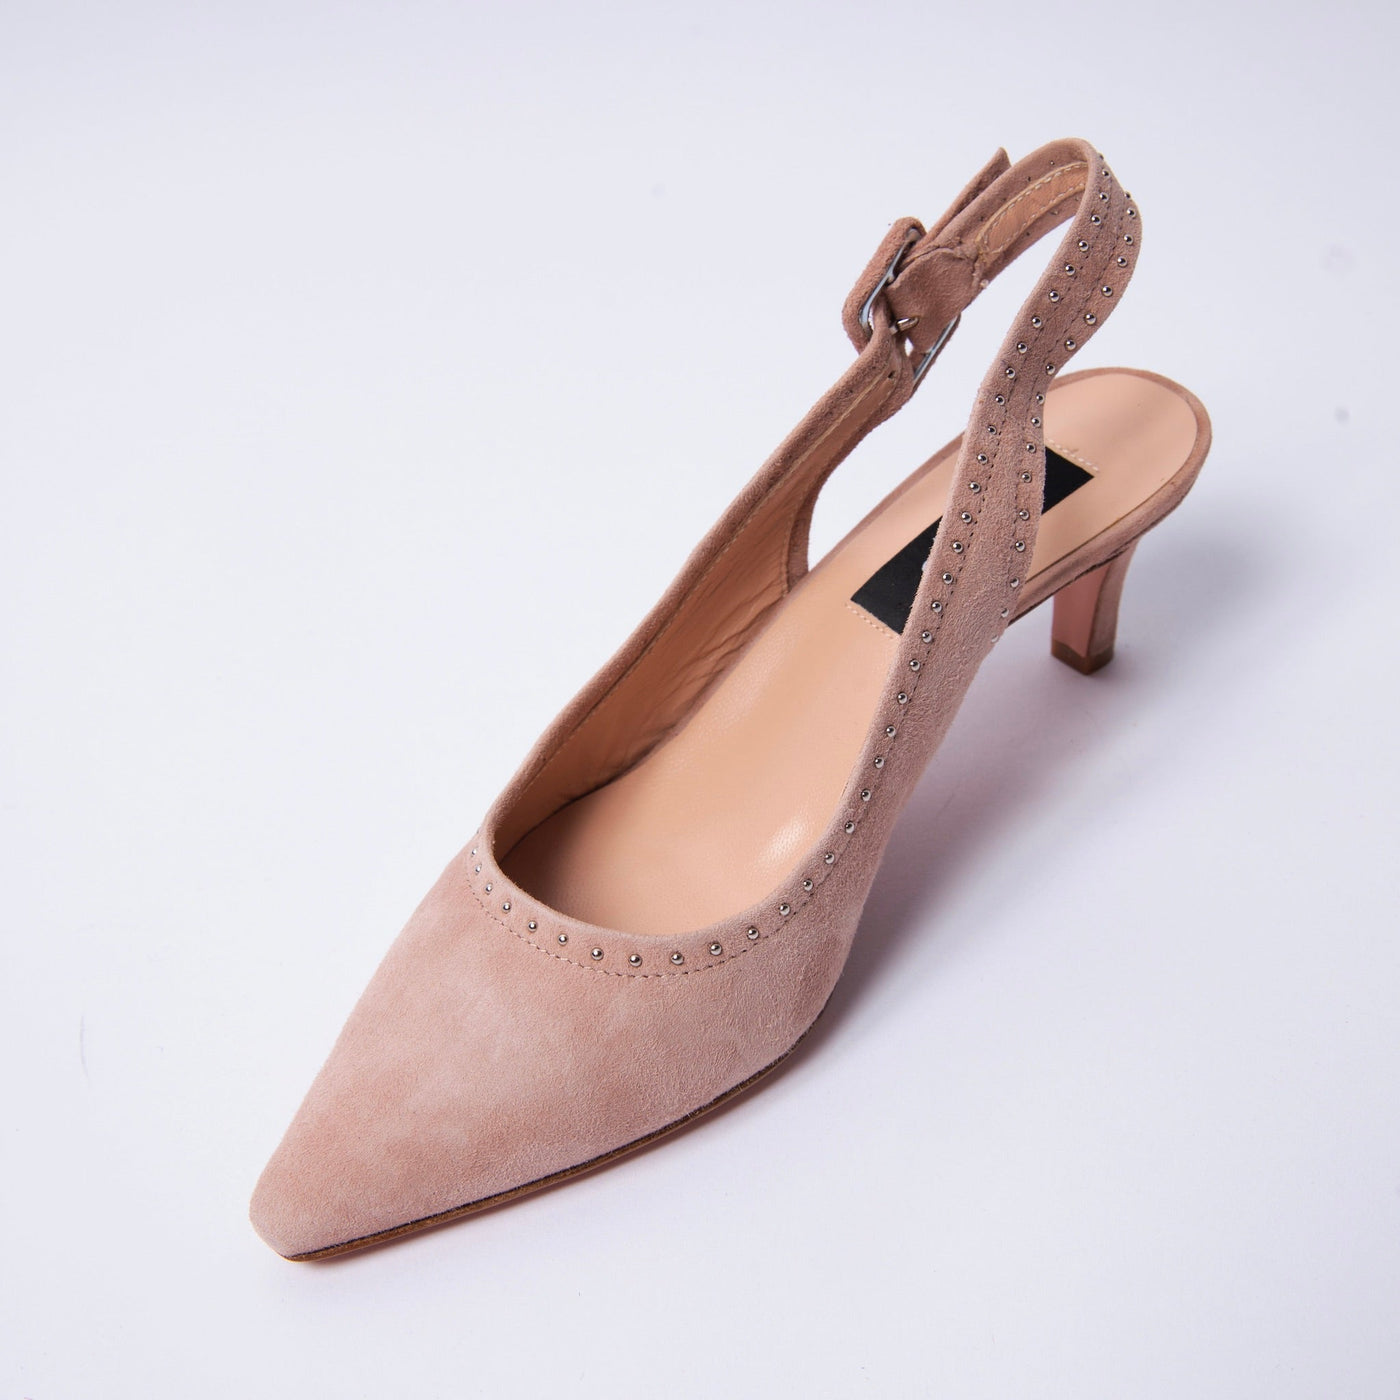 Nude suede slingback sandals with decorative silver studs.